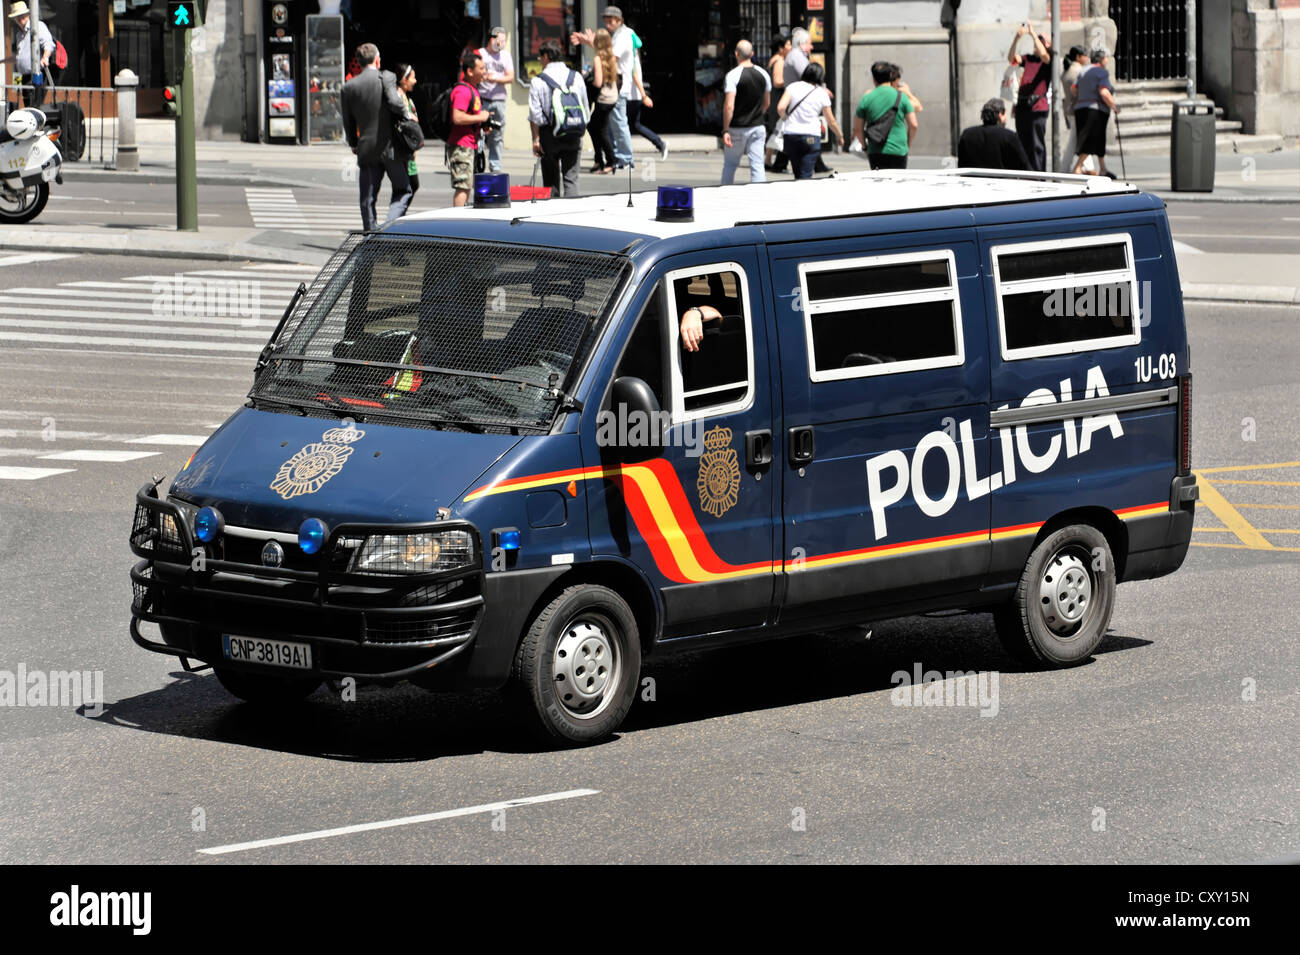 Policia, police in action, Madrid, Spain, Europe Stock Photo